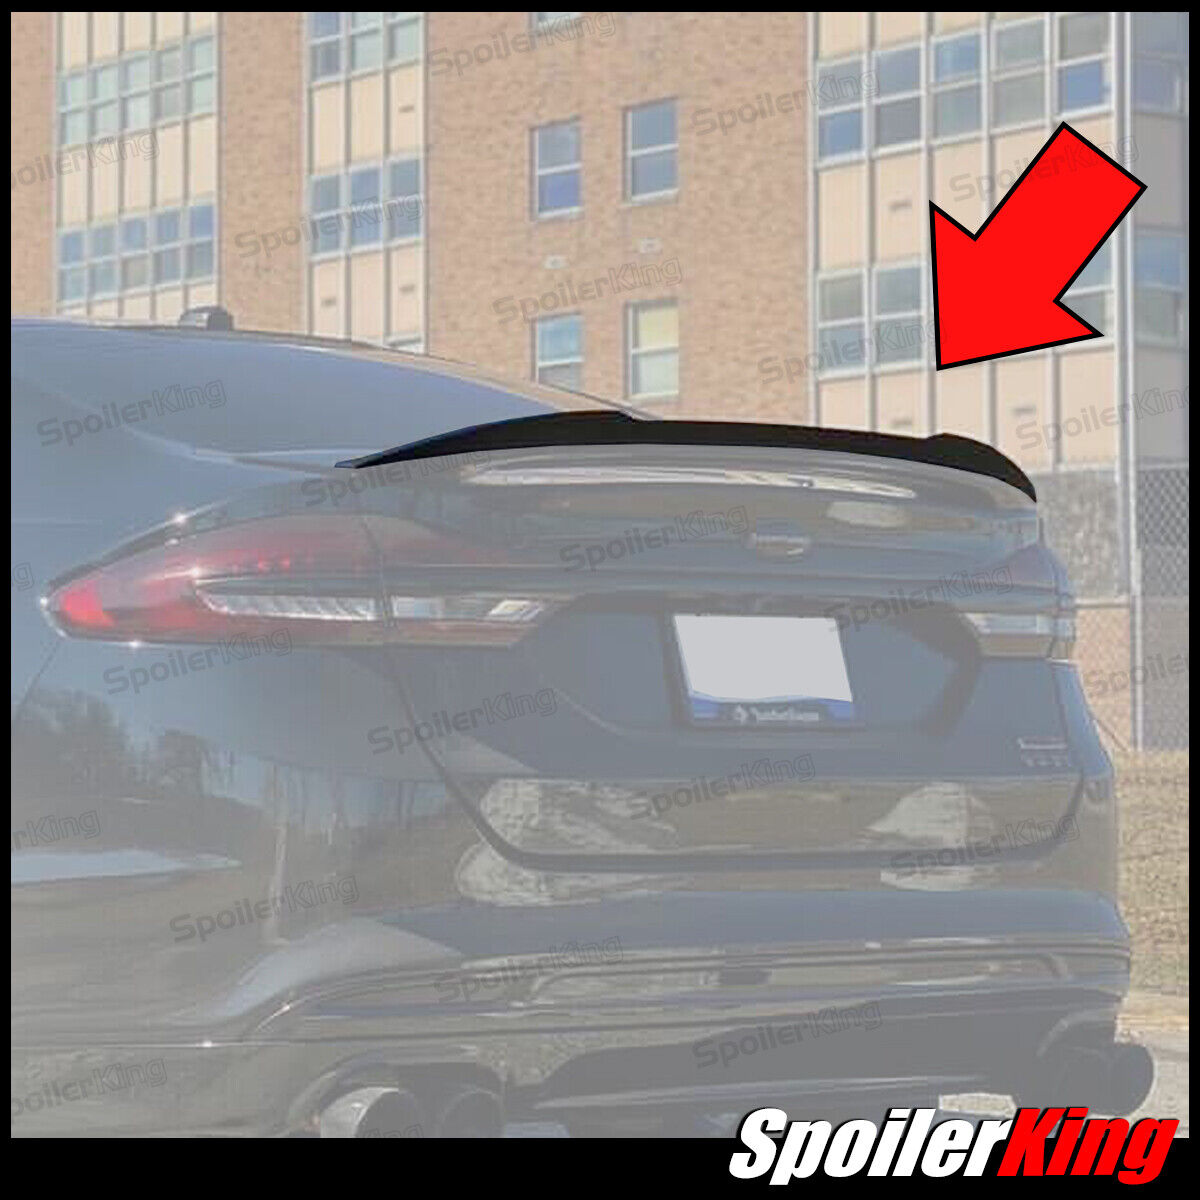 SpoilerKing 284FC Rear on add-on lip spoiler (Fits: Ford Fusion 2013-2021)